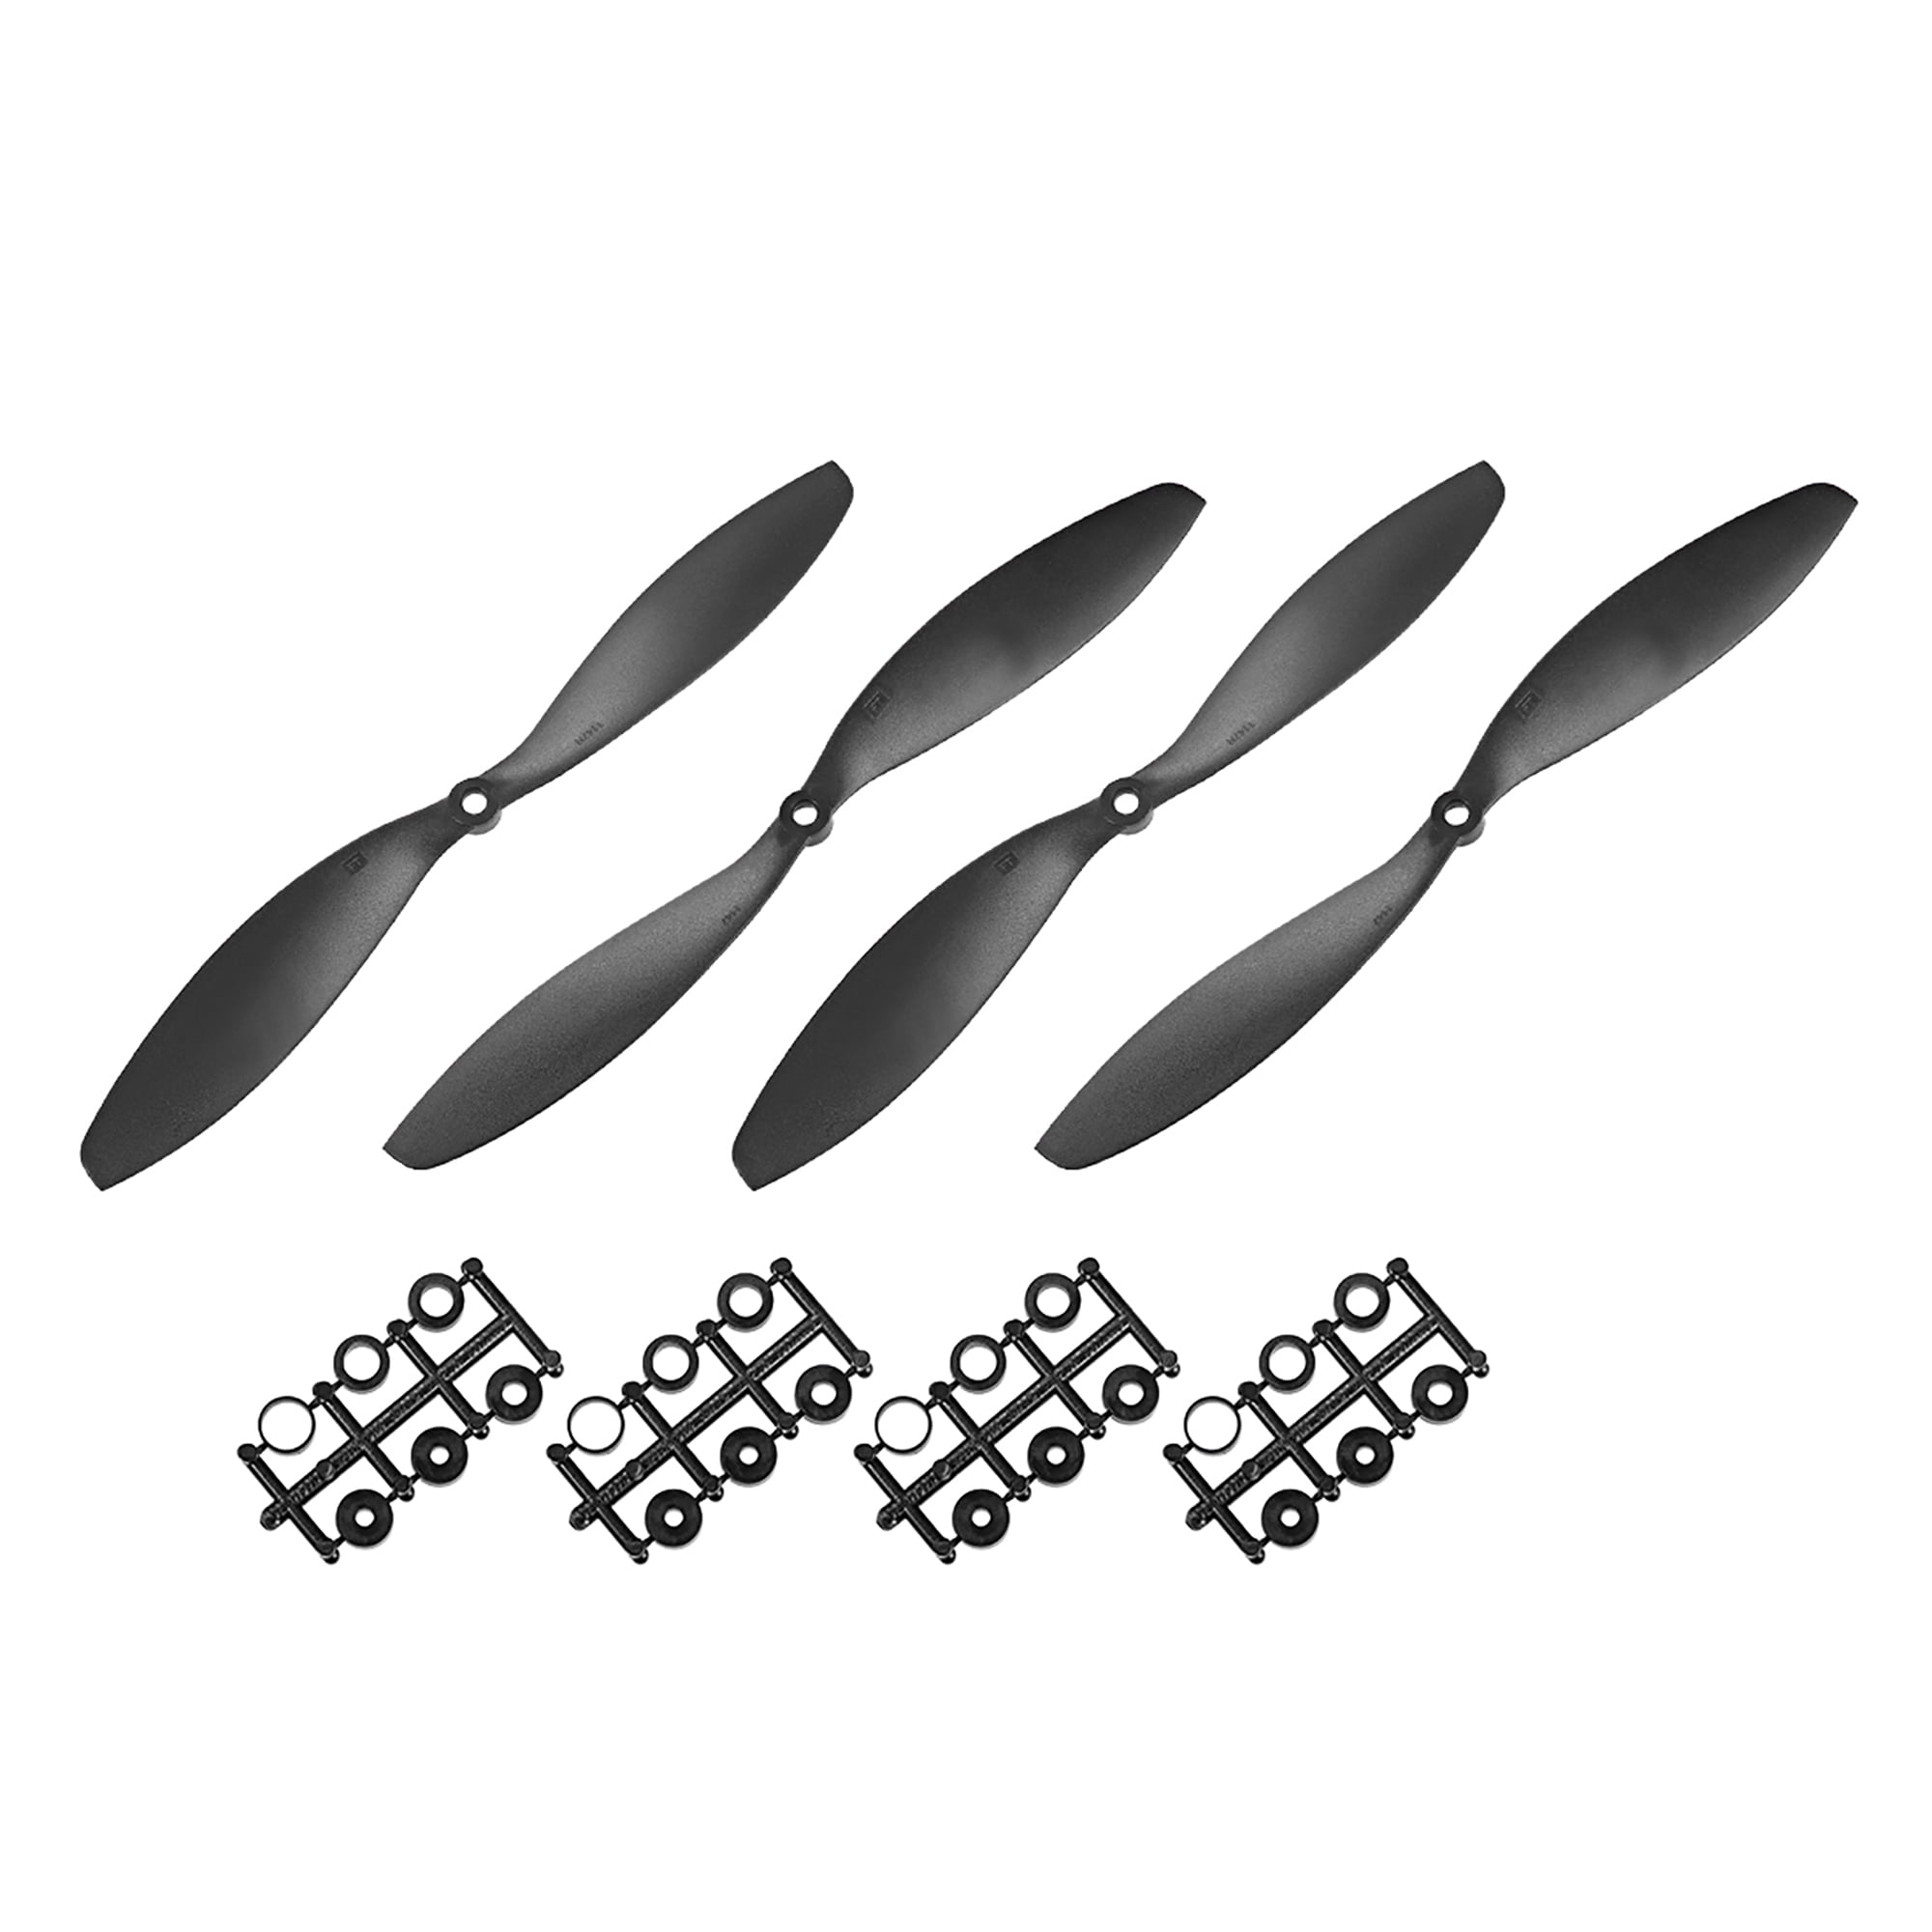 Details about   RC Propellers CW 1147 11"x4.7" 2-Vane Airplane Toy Black 4 Pairs w Adapters 